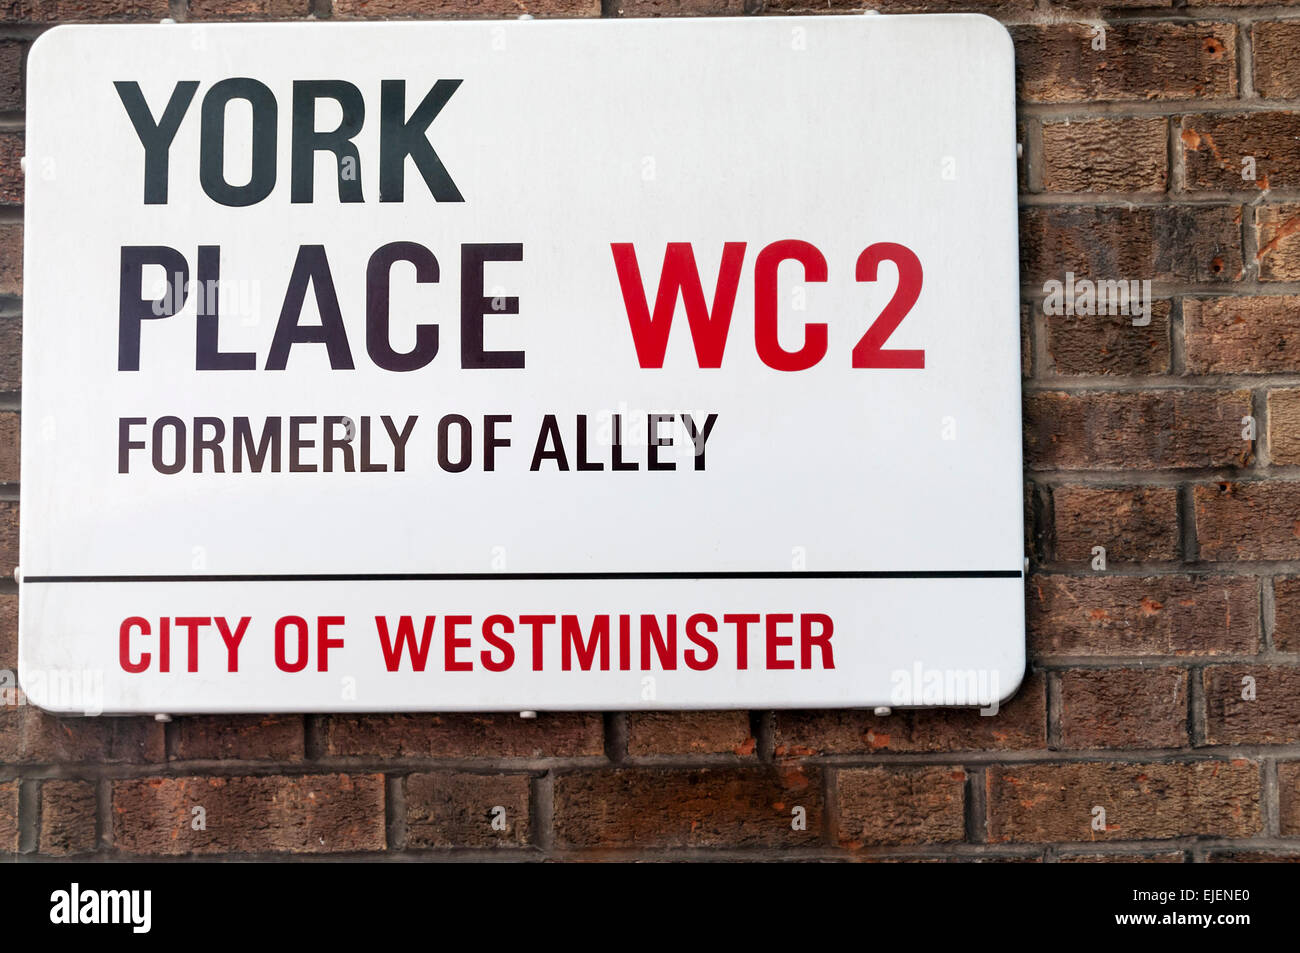 Street nameplate for Of Alley, now named York Place in central London.  SEE DESCRIPTION FOR DETAILS. Stock Photo